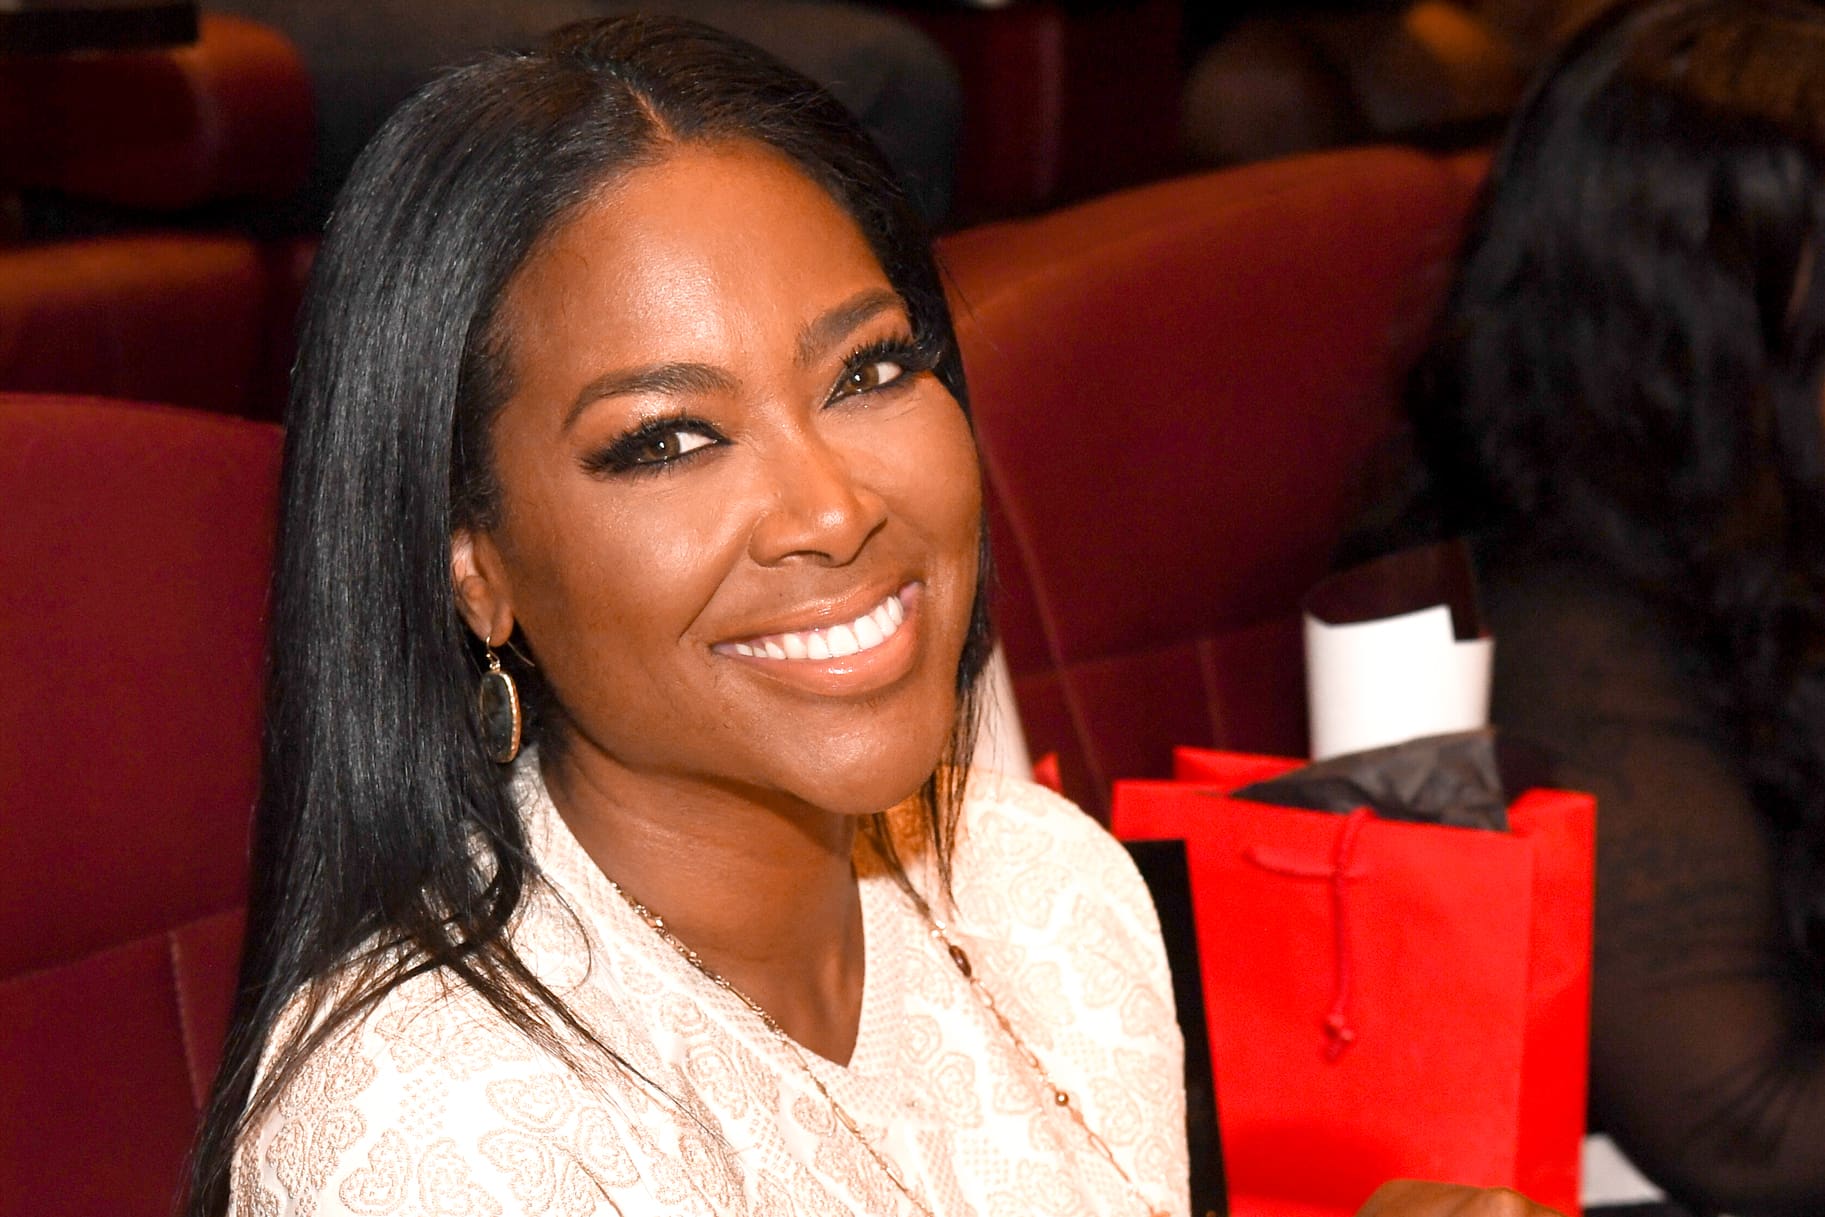 Kenya Moore's Latest Video With Baby Brooklyn Shows The Baby Girl Getting Excited When She Hears The Word 'Mommy' - Watch It Here